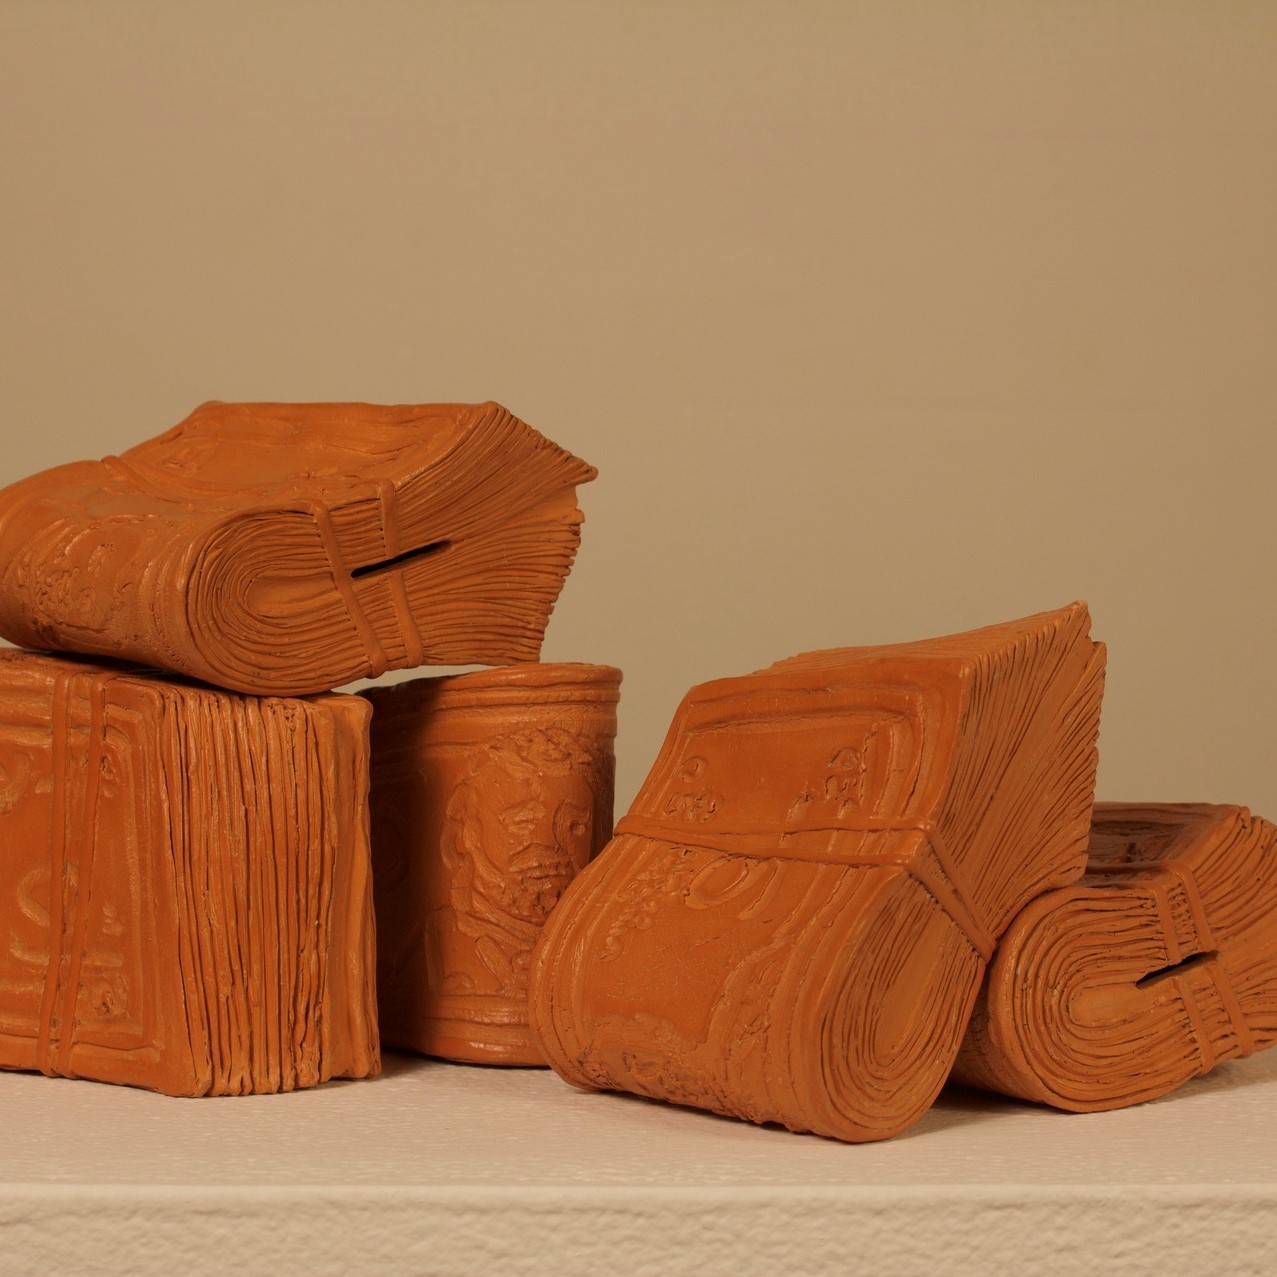 burnt orange colored clay sculptures that look like wads of cash rubber banded together. There are 5 different 'wads' of cash made of clay sitting around and resting on each other.